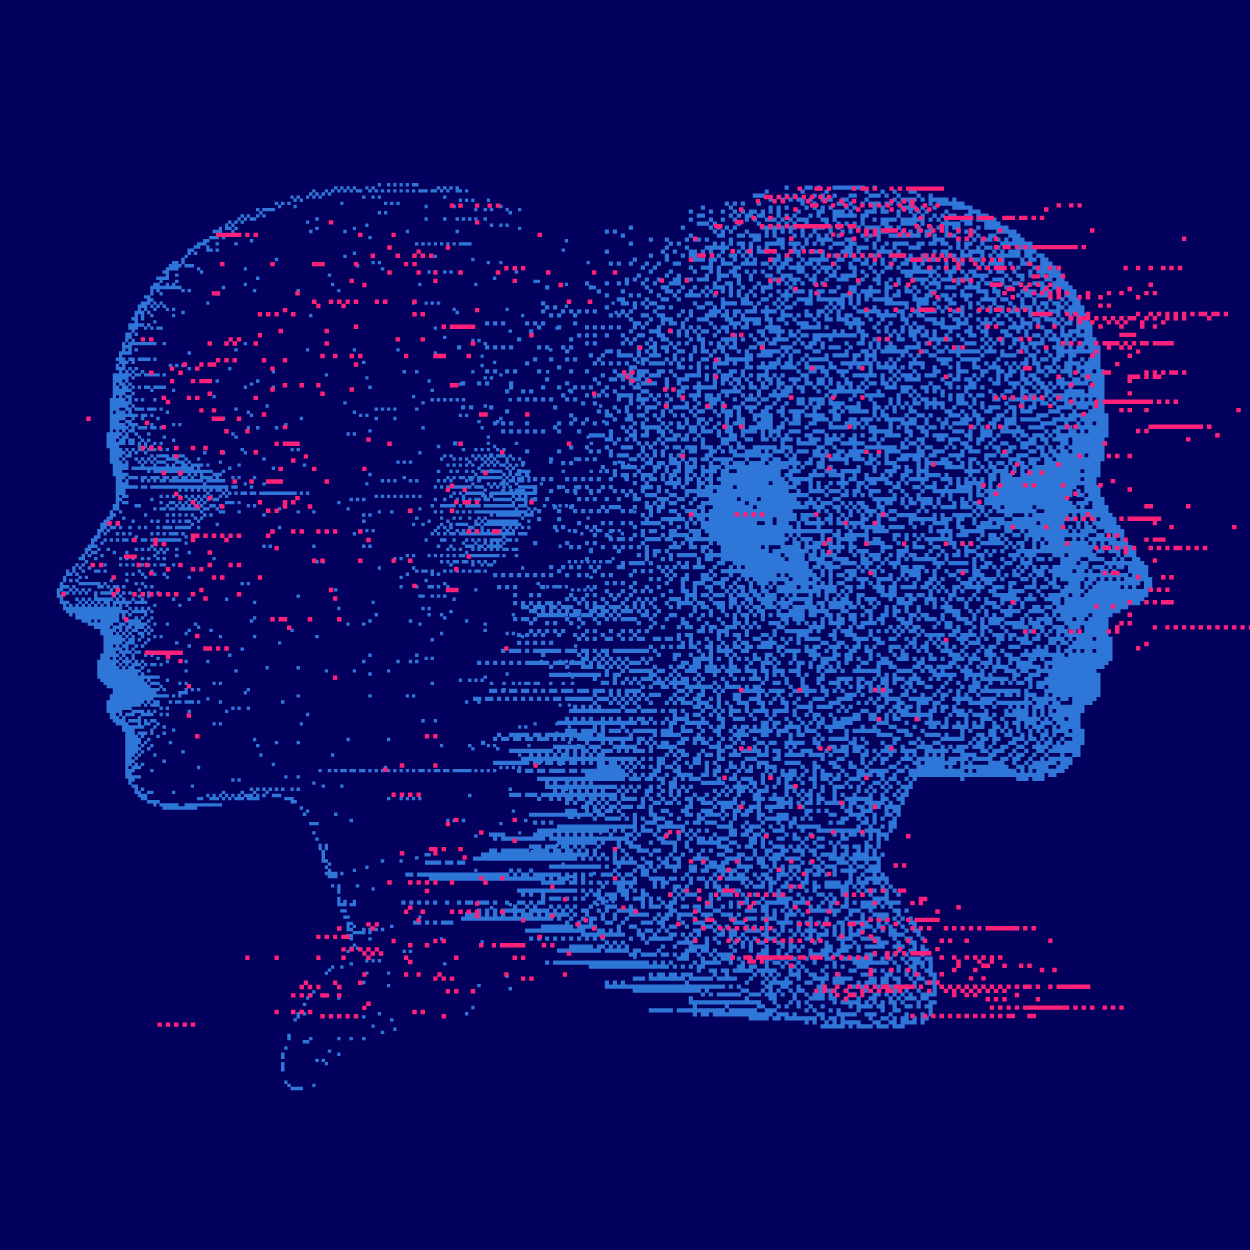 Artists conceptualization of a digital twin. Shows the mirrored image of two heads. The only difference is one head is filled in with dots whereas the second head has spaces missing. 